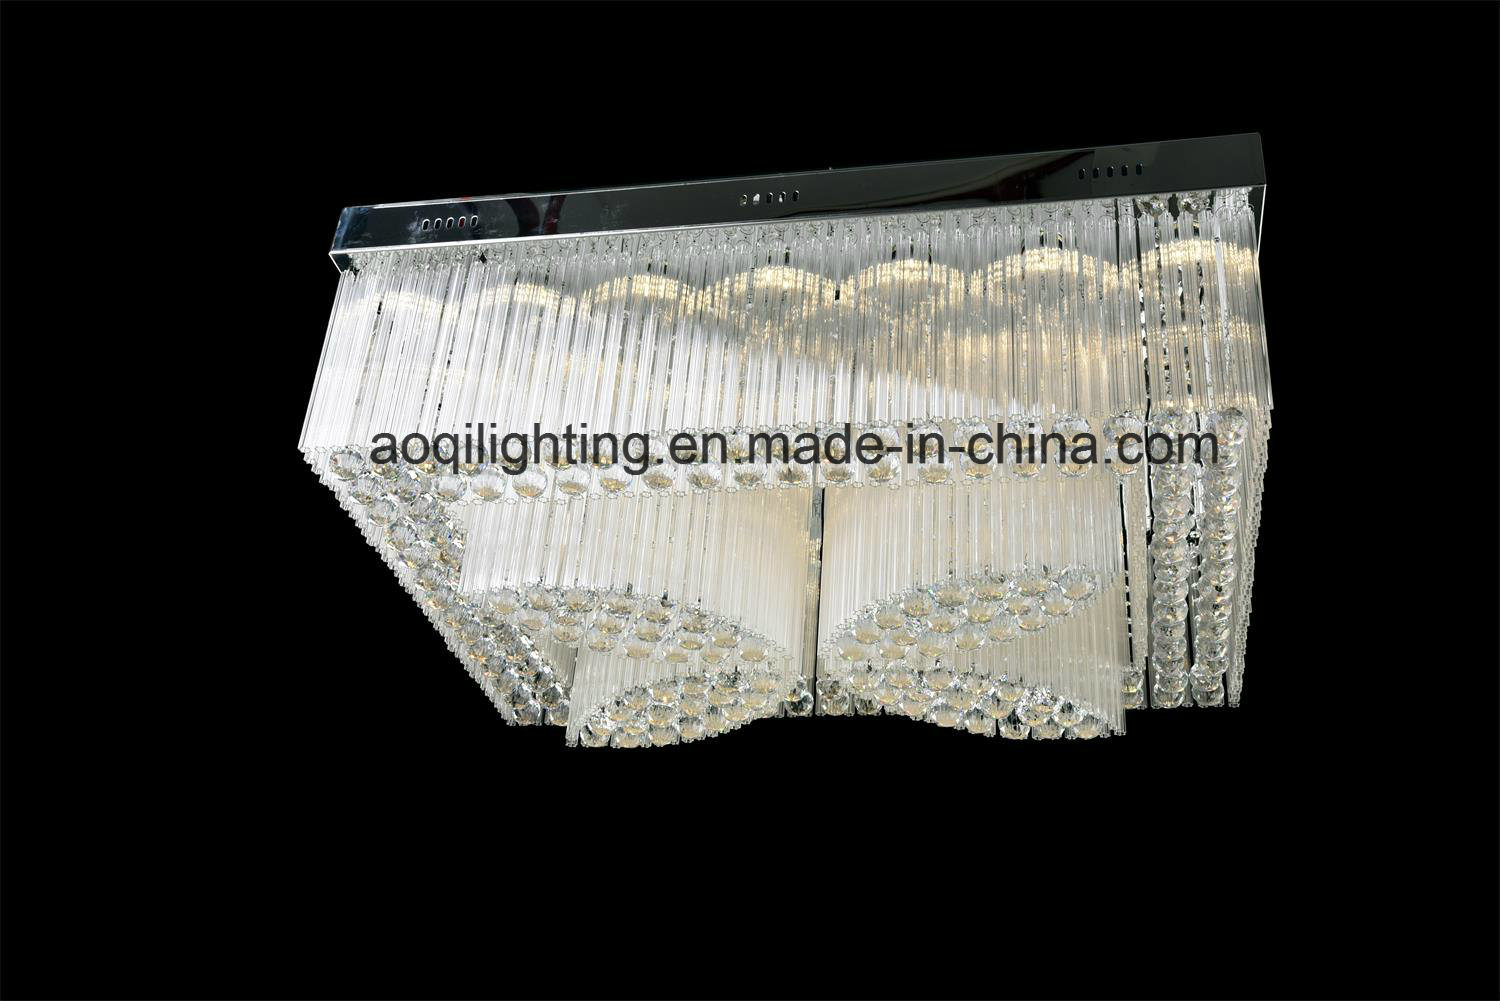 Individuality Crystal Decorative ceiling Light (AQ-88460)